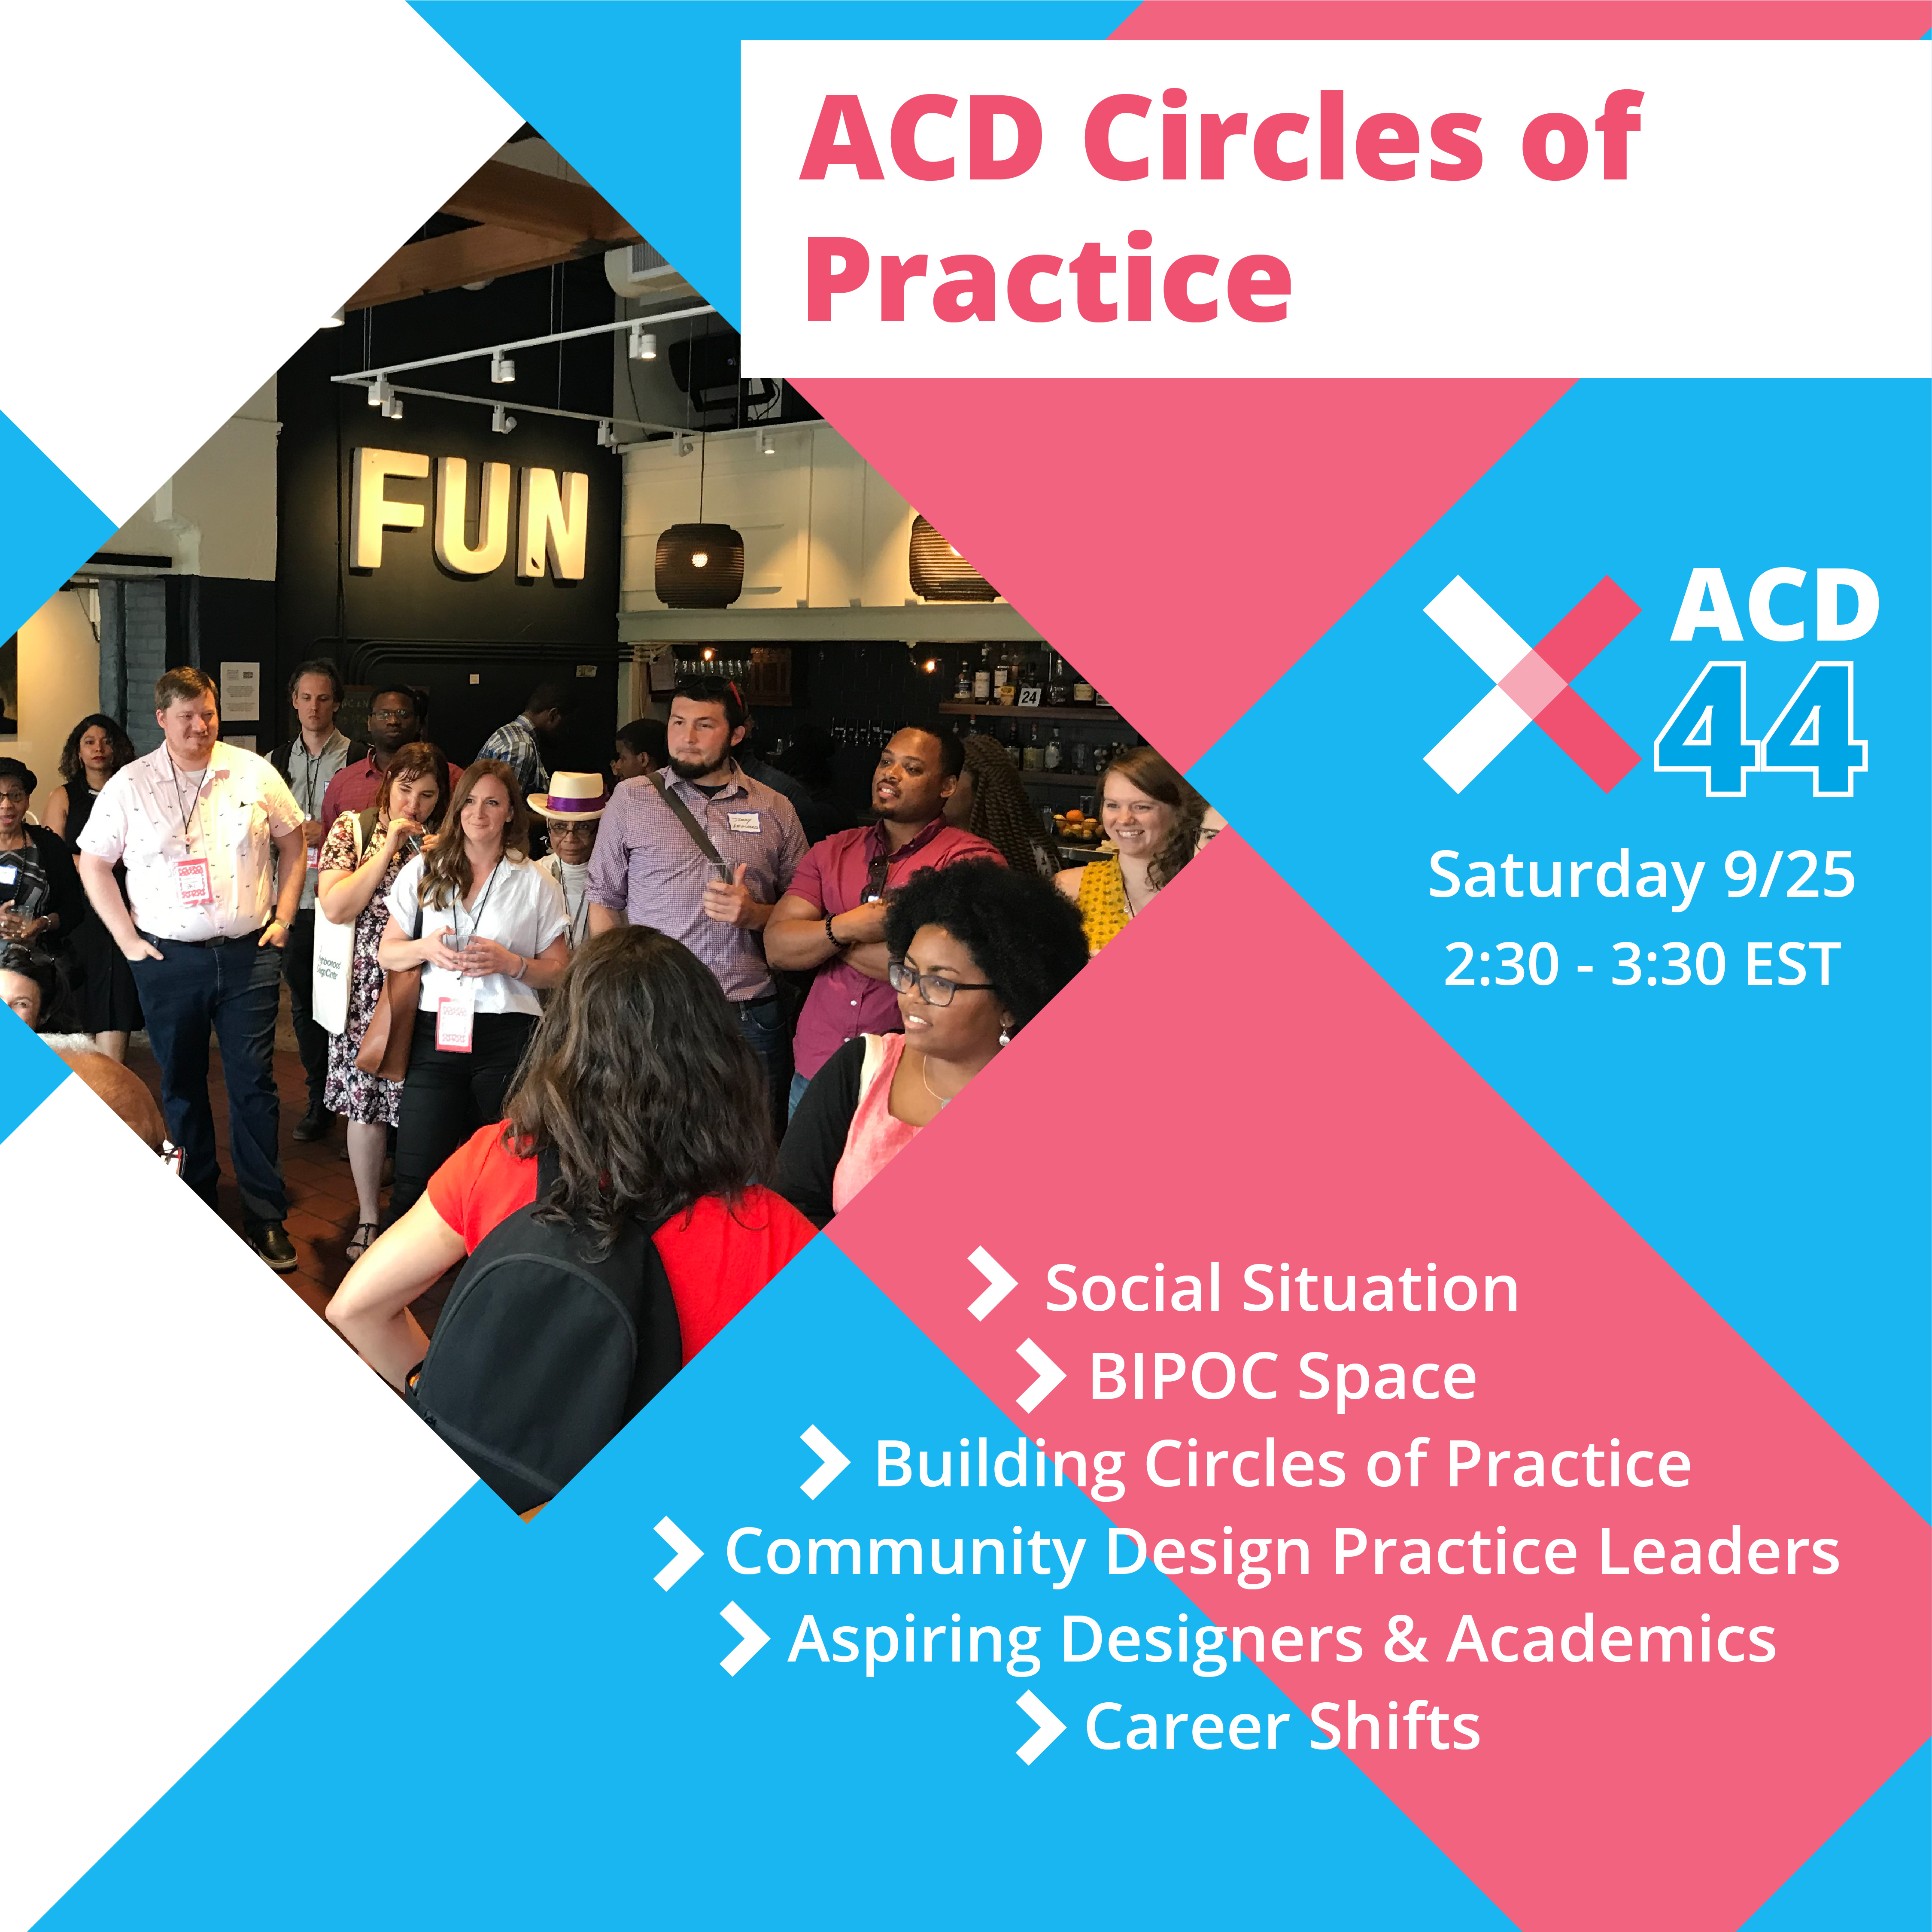 ACD2021: ACD Circles of Practice